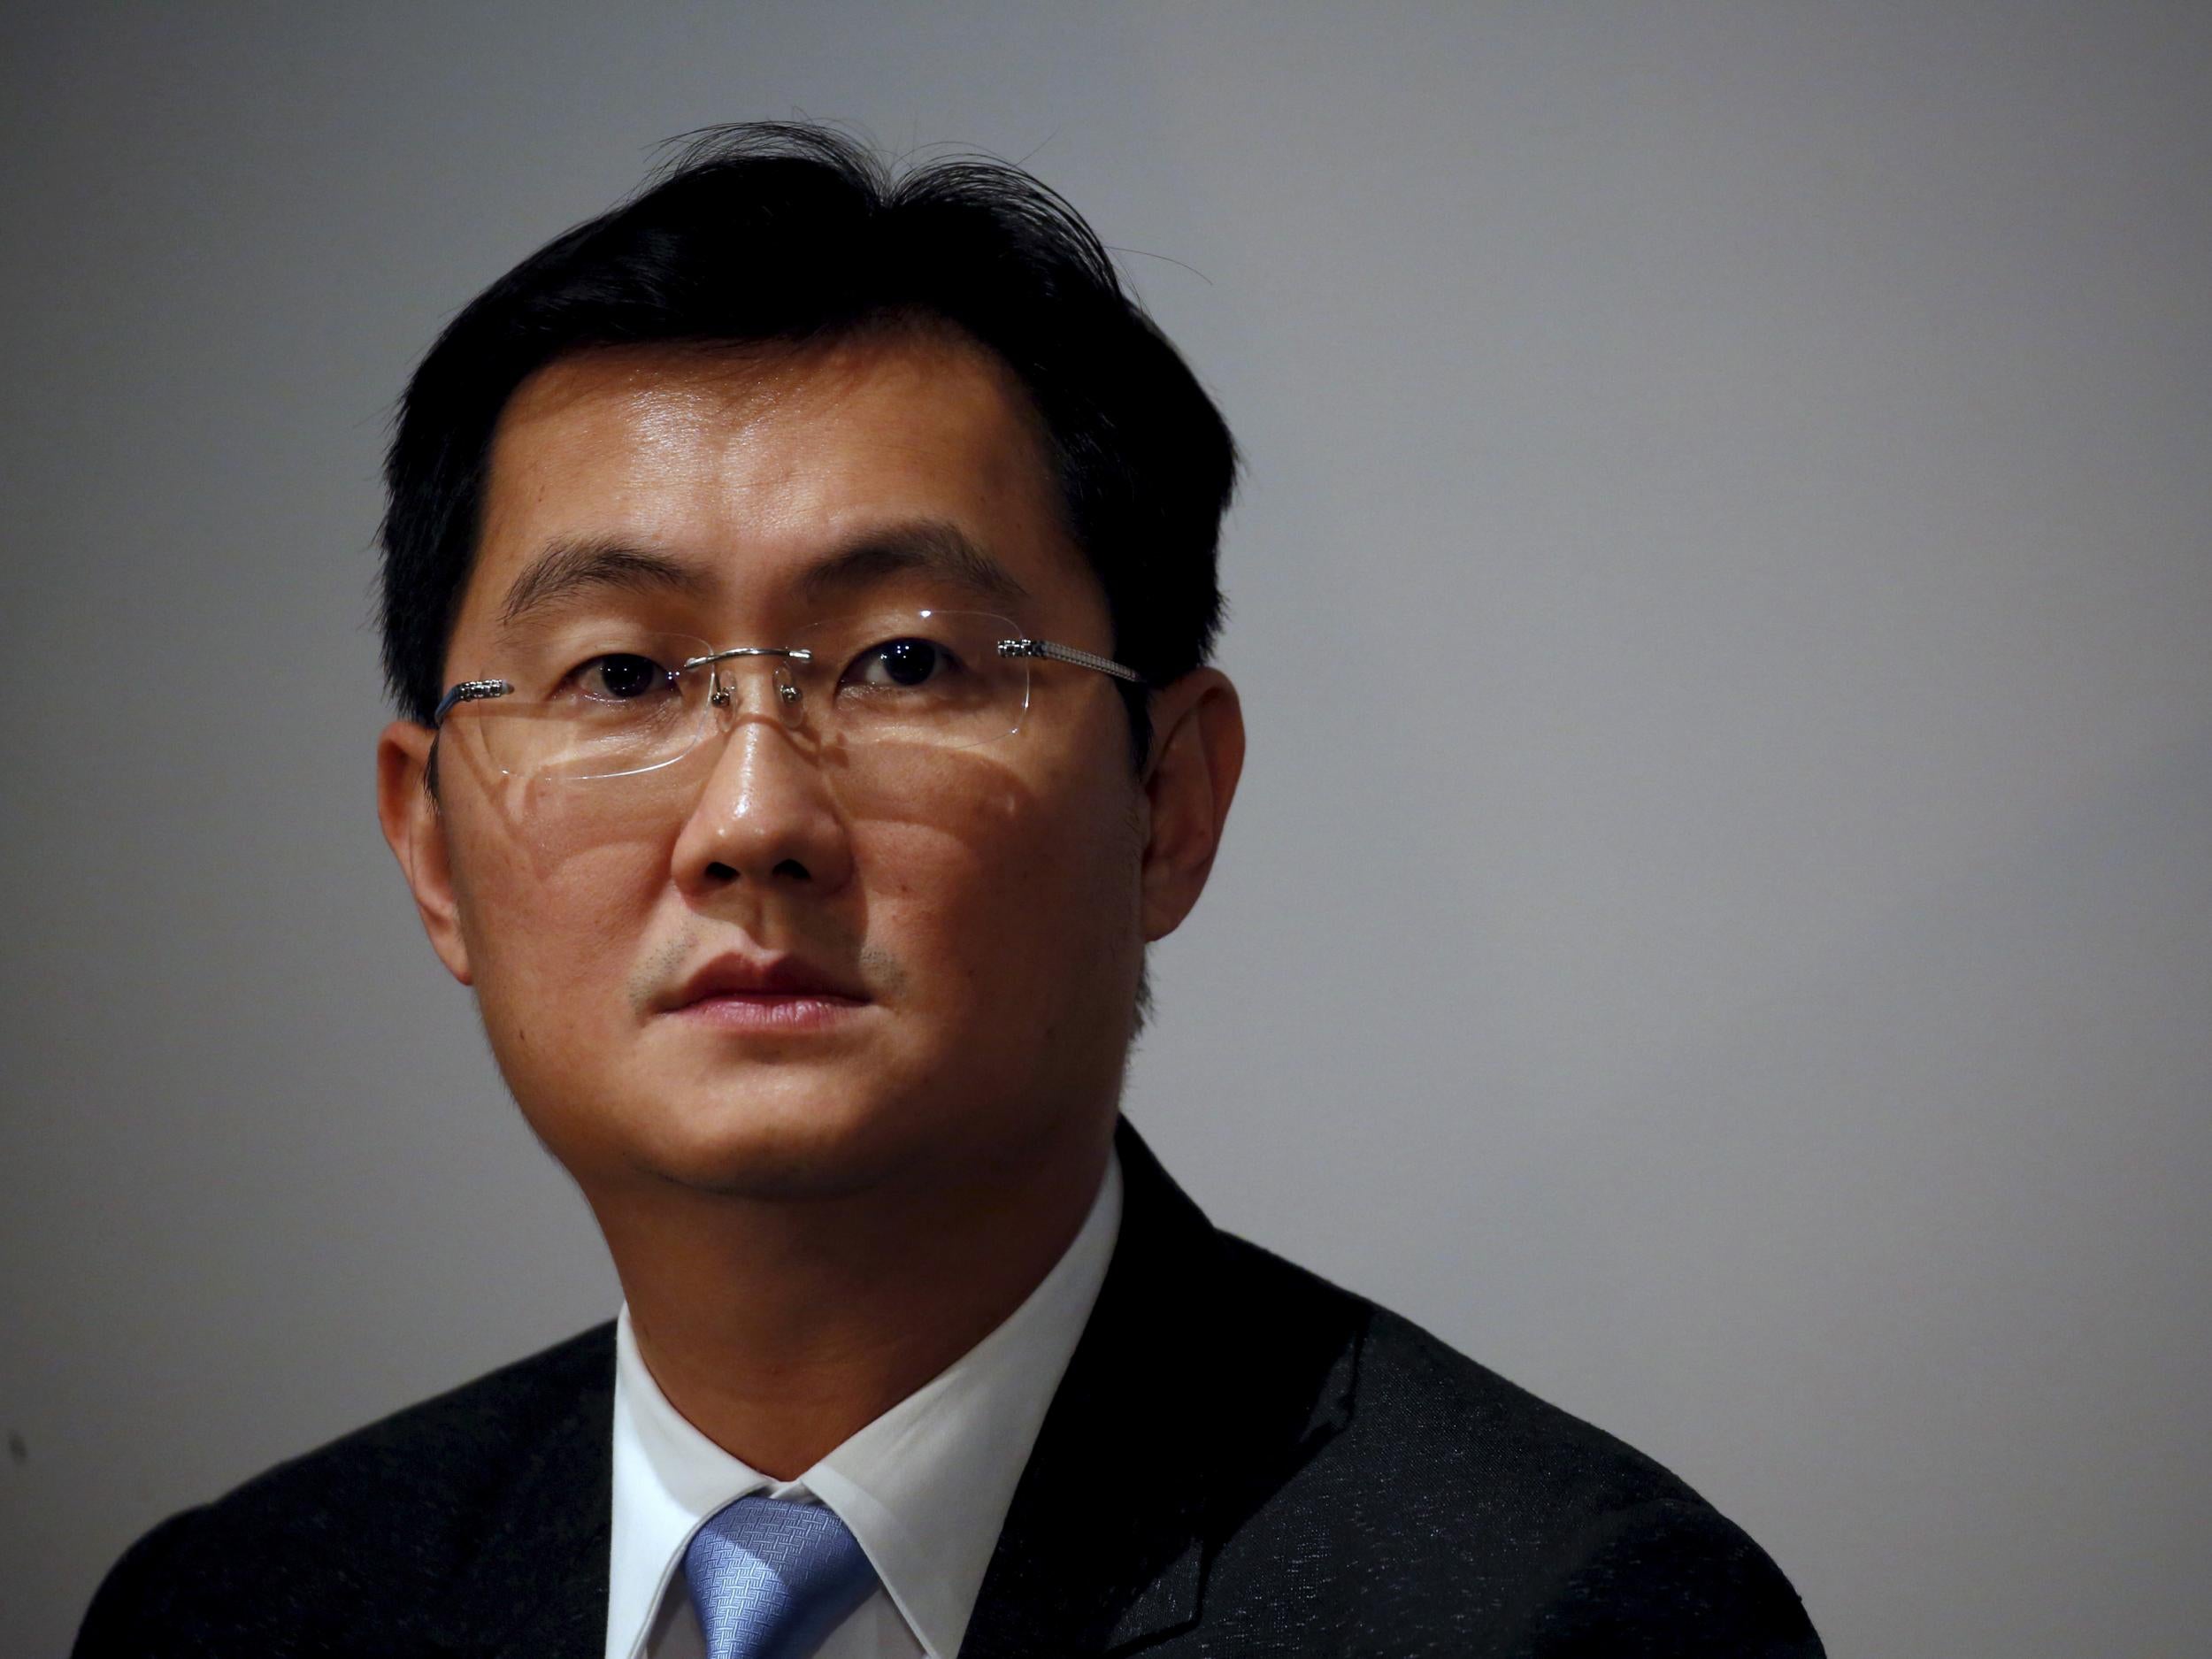 Tencent Chairman and Chief Executive Officer Pony Ma Huateng